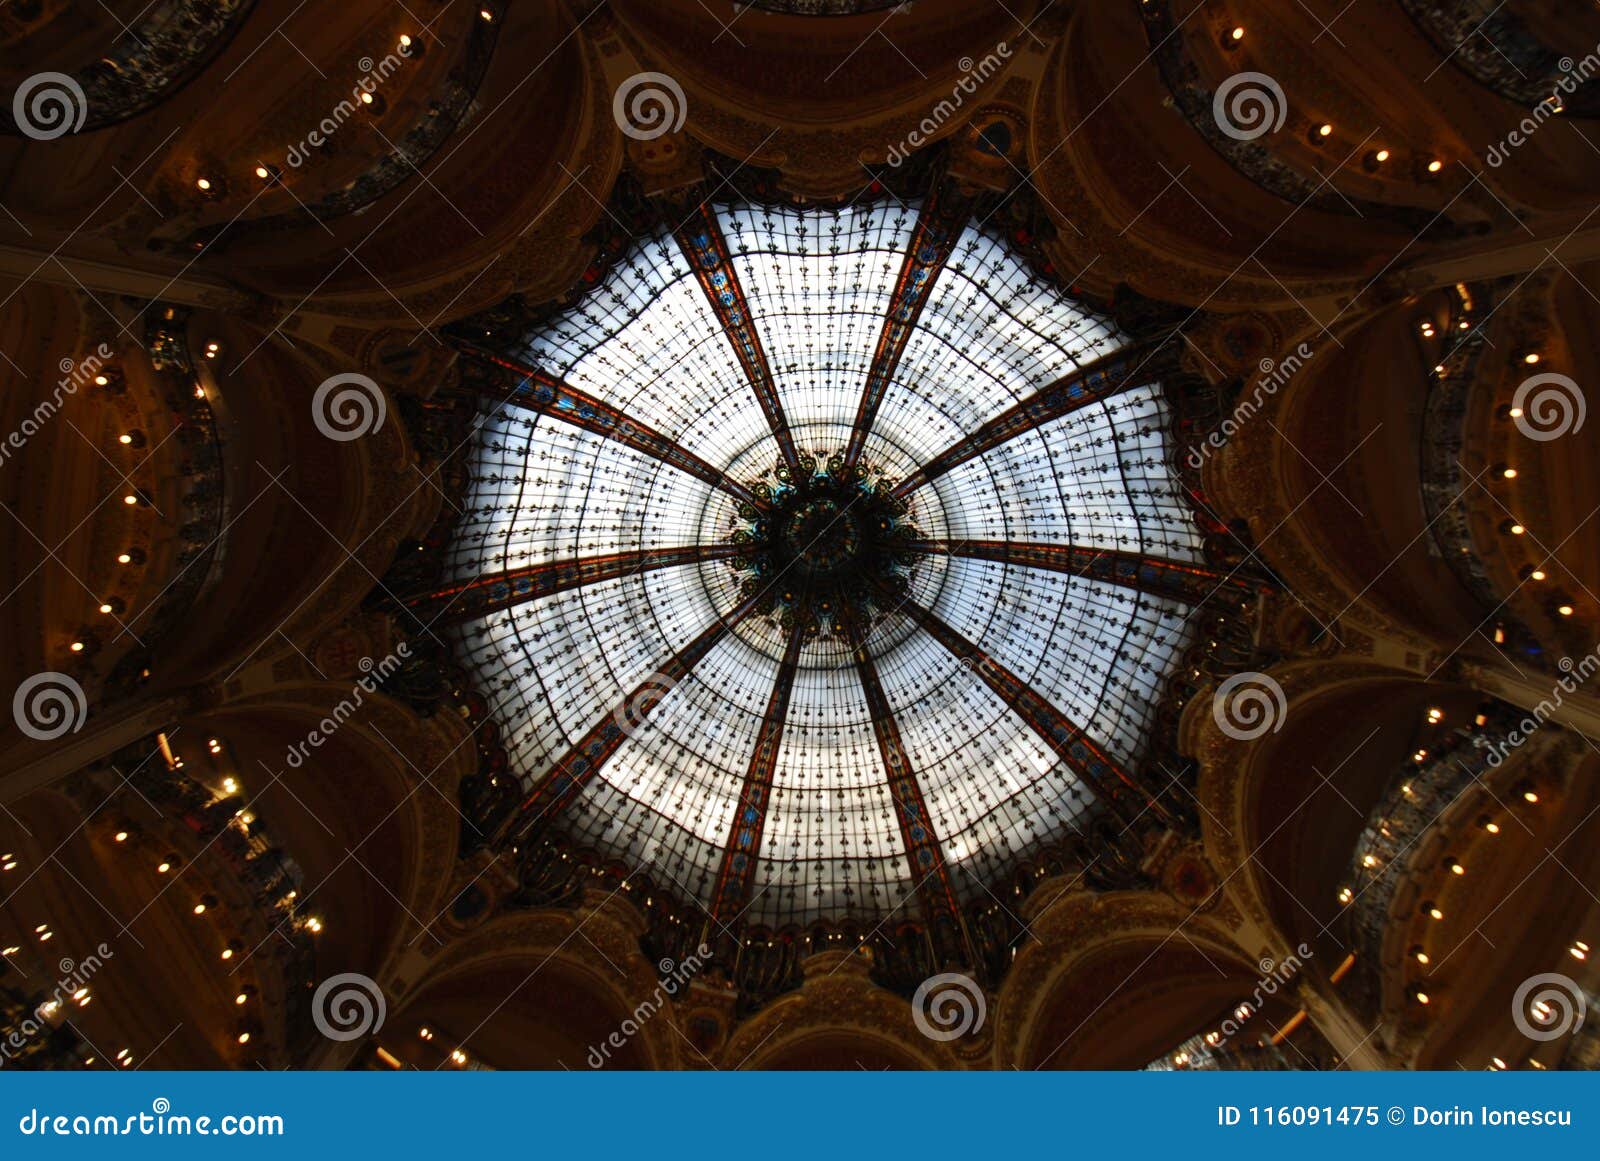 Galeries Lafayette Store Dome Building Architecture Ceiling